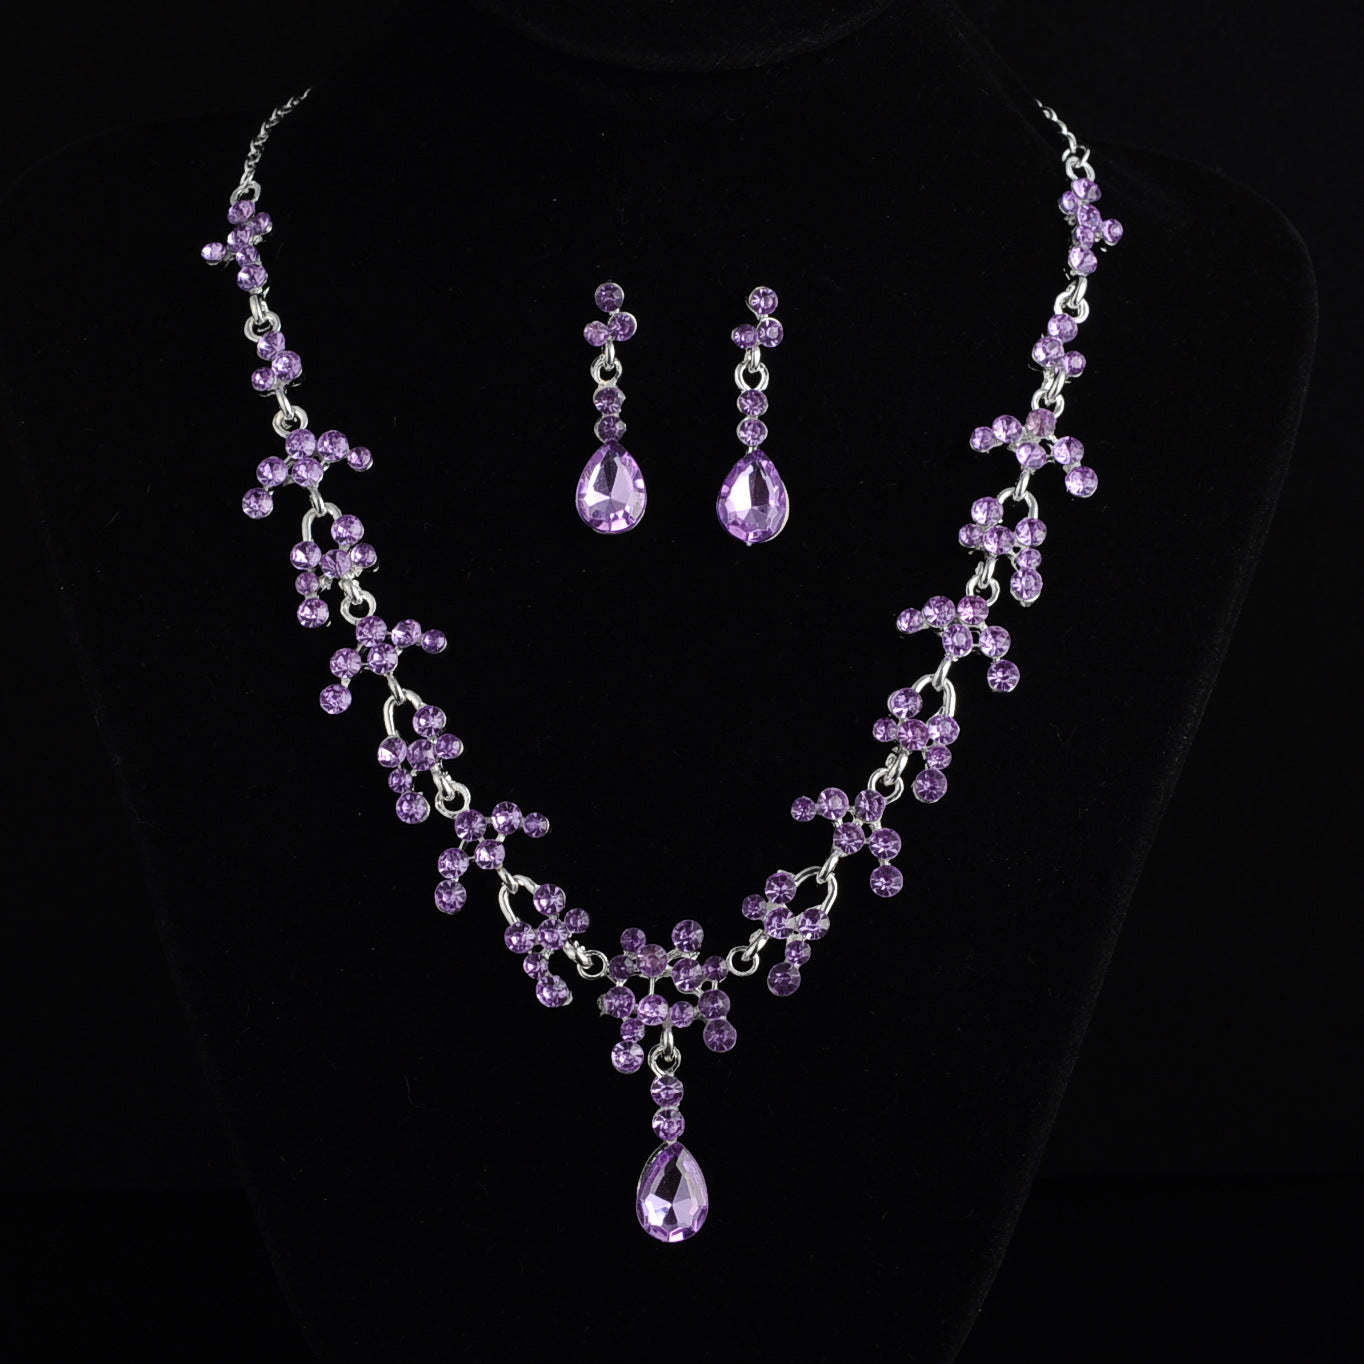 A Maramalive™ Wedding Jewelry Set: Necklace, Earrings, and Dress Accessories set with crystals.